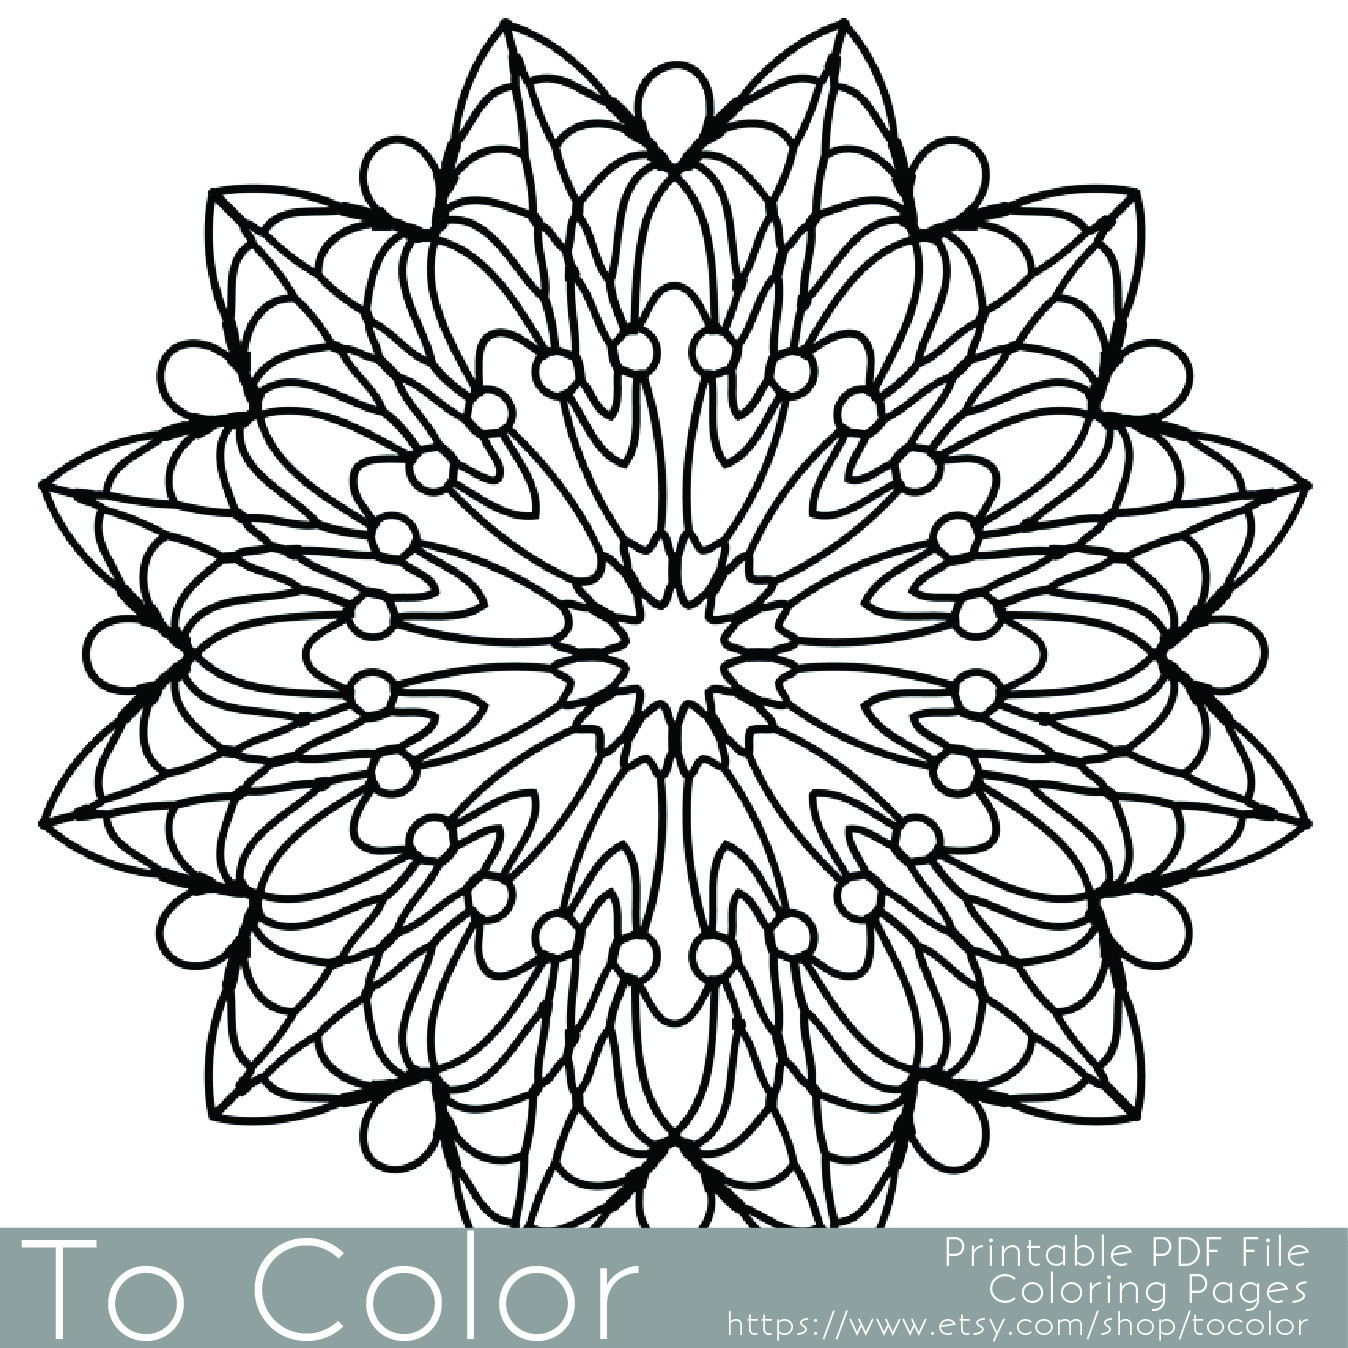 Gel Pens For Adult Coloring Books
 Simple Printable Coloring Pages for Adults Gel Pens Mandala